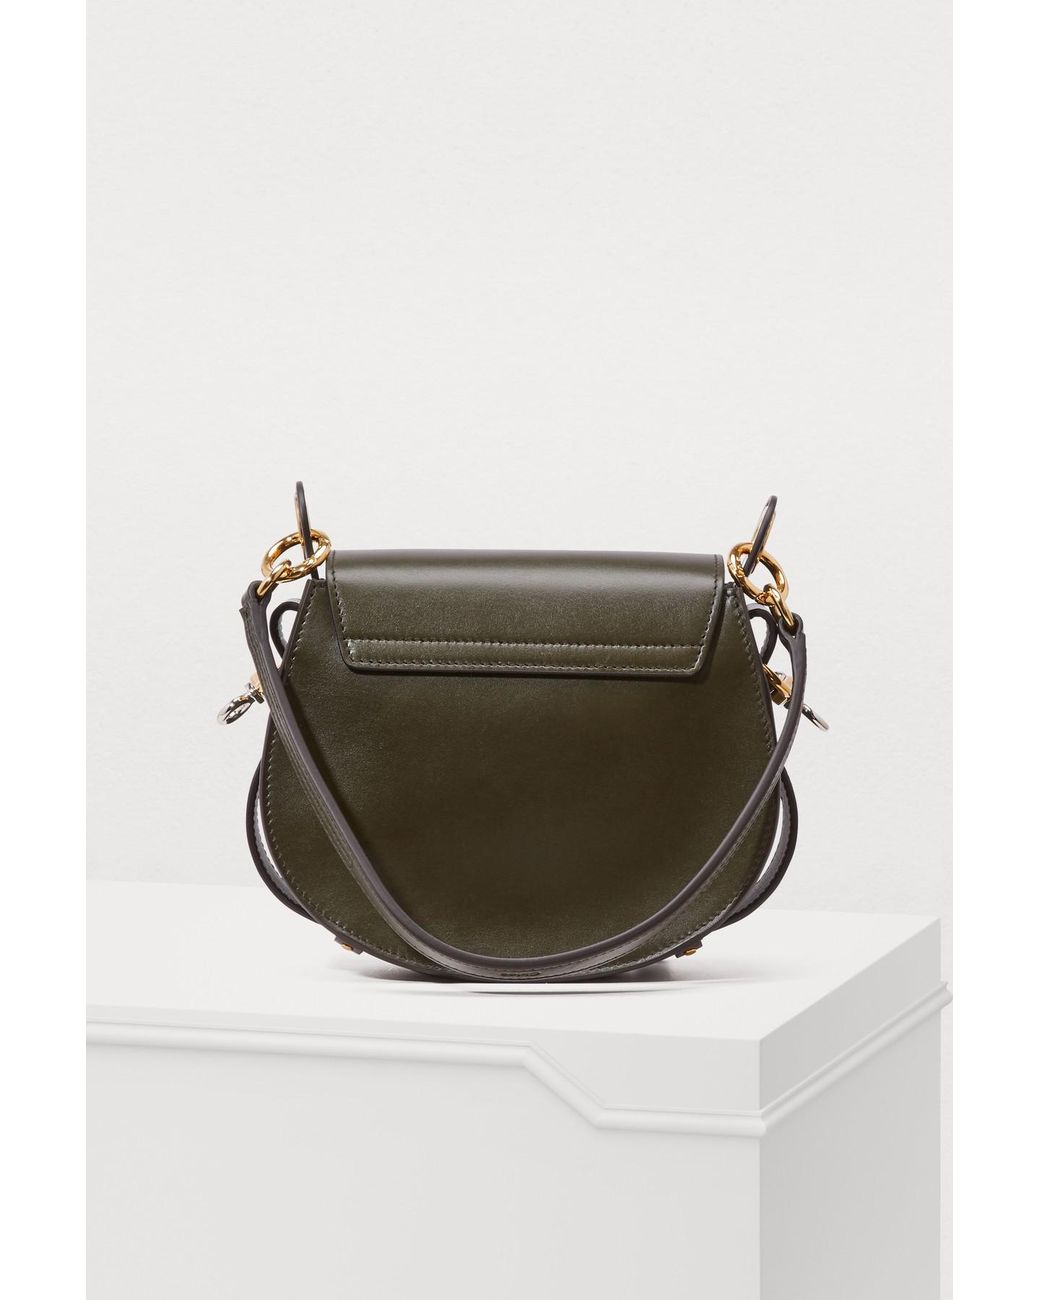 Chloé Tess Small Leather & Suede Shoulder Bag in Black